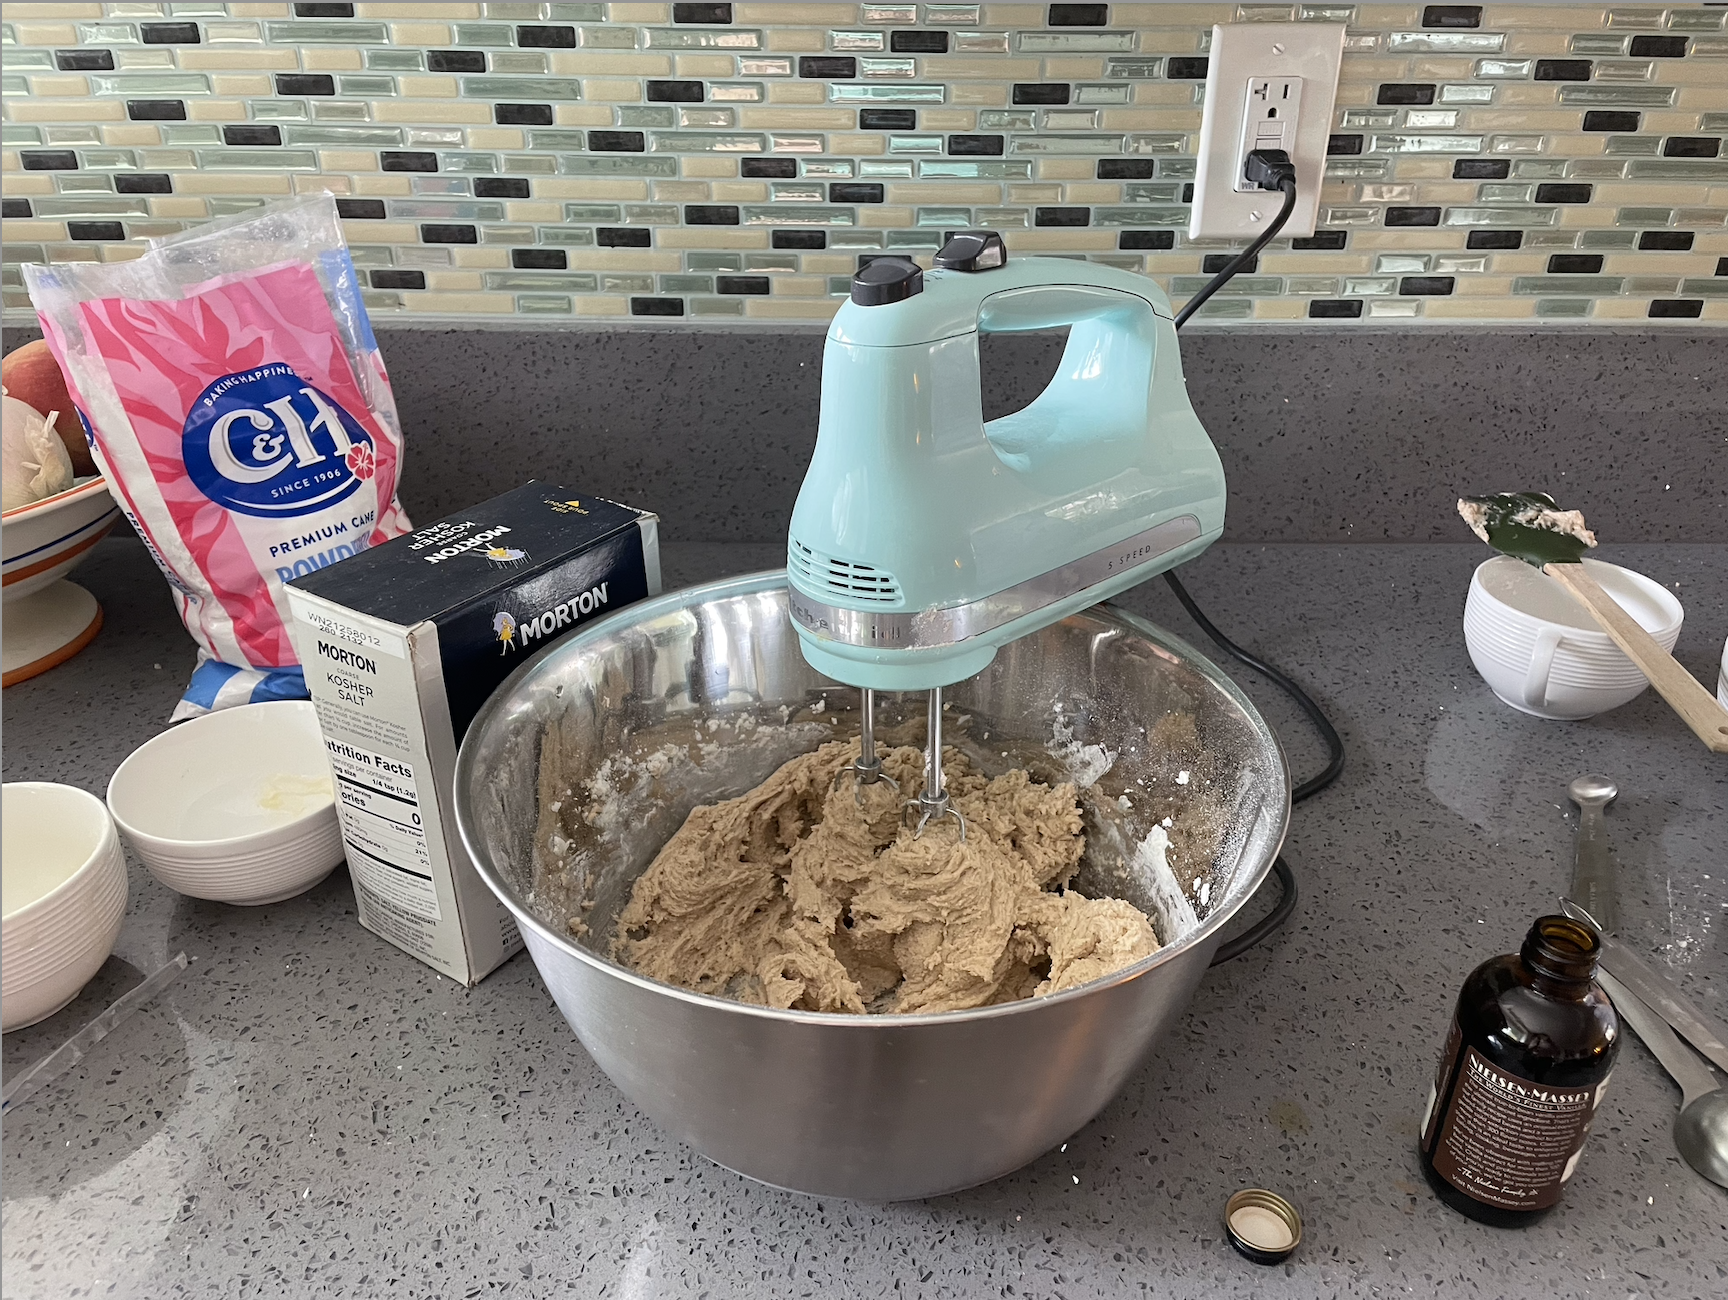 a hand mixer in a bowl of thicker cookie batter with flour added in; other ingredients like sugar, salt, and vanilla surround the bowl